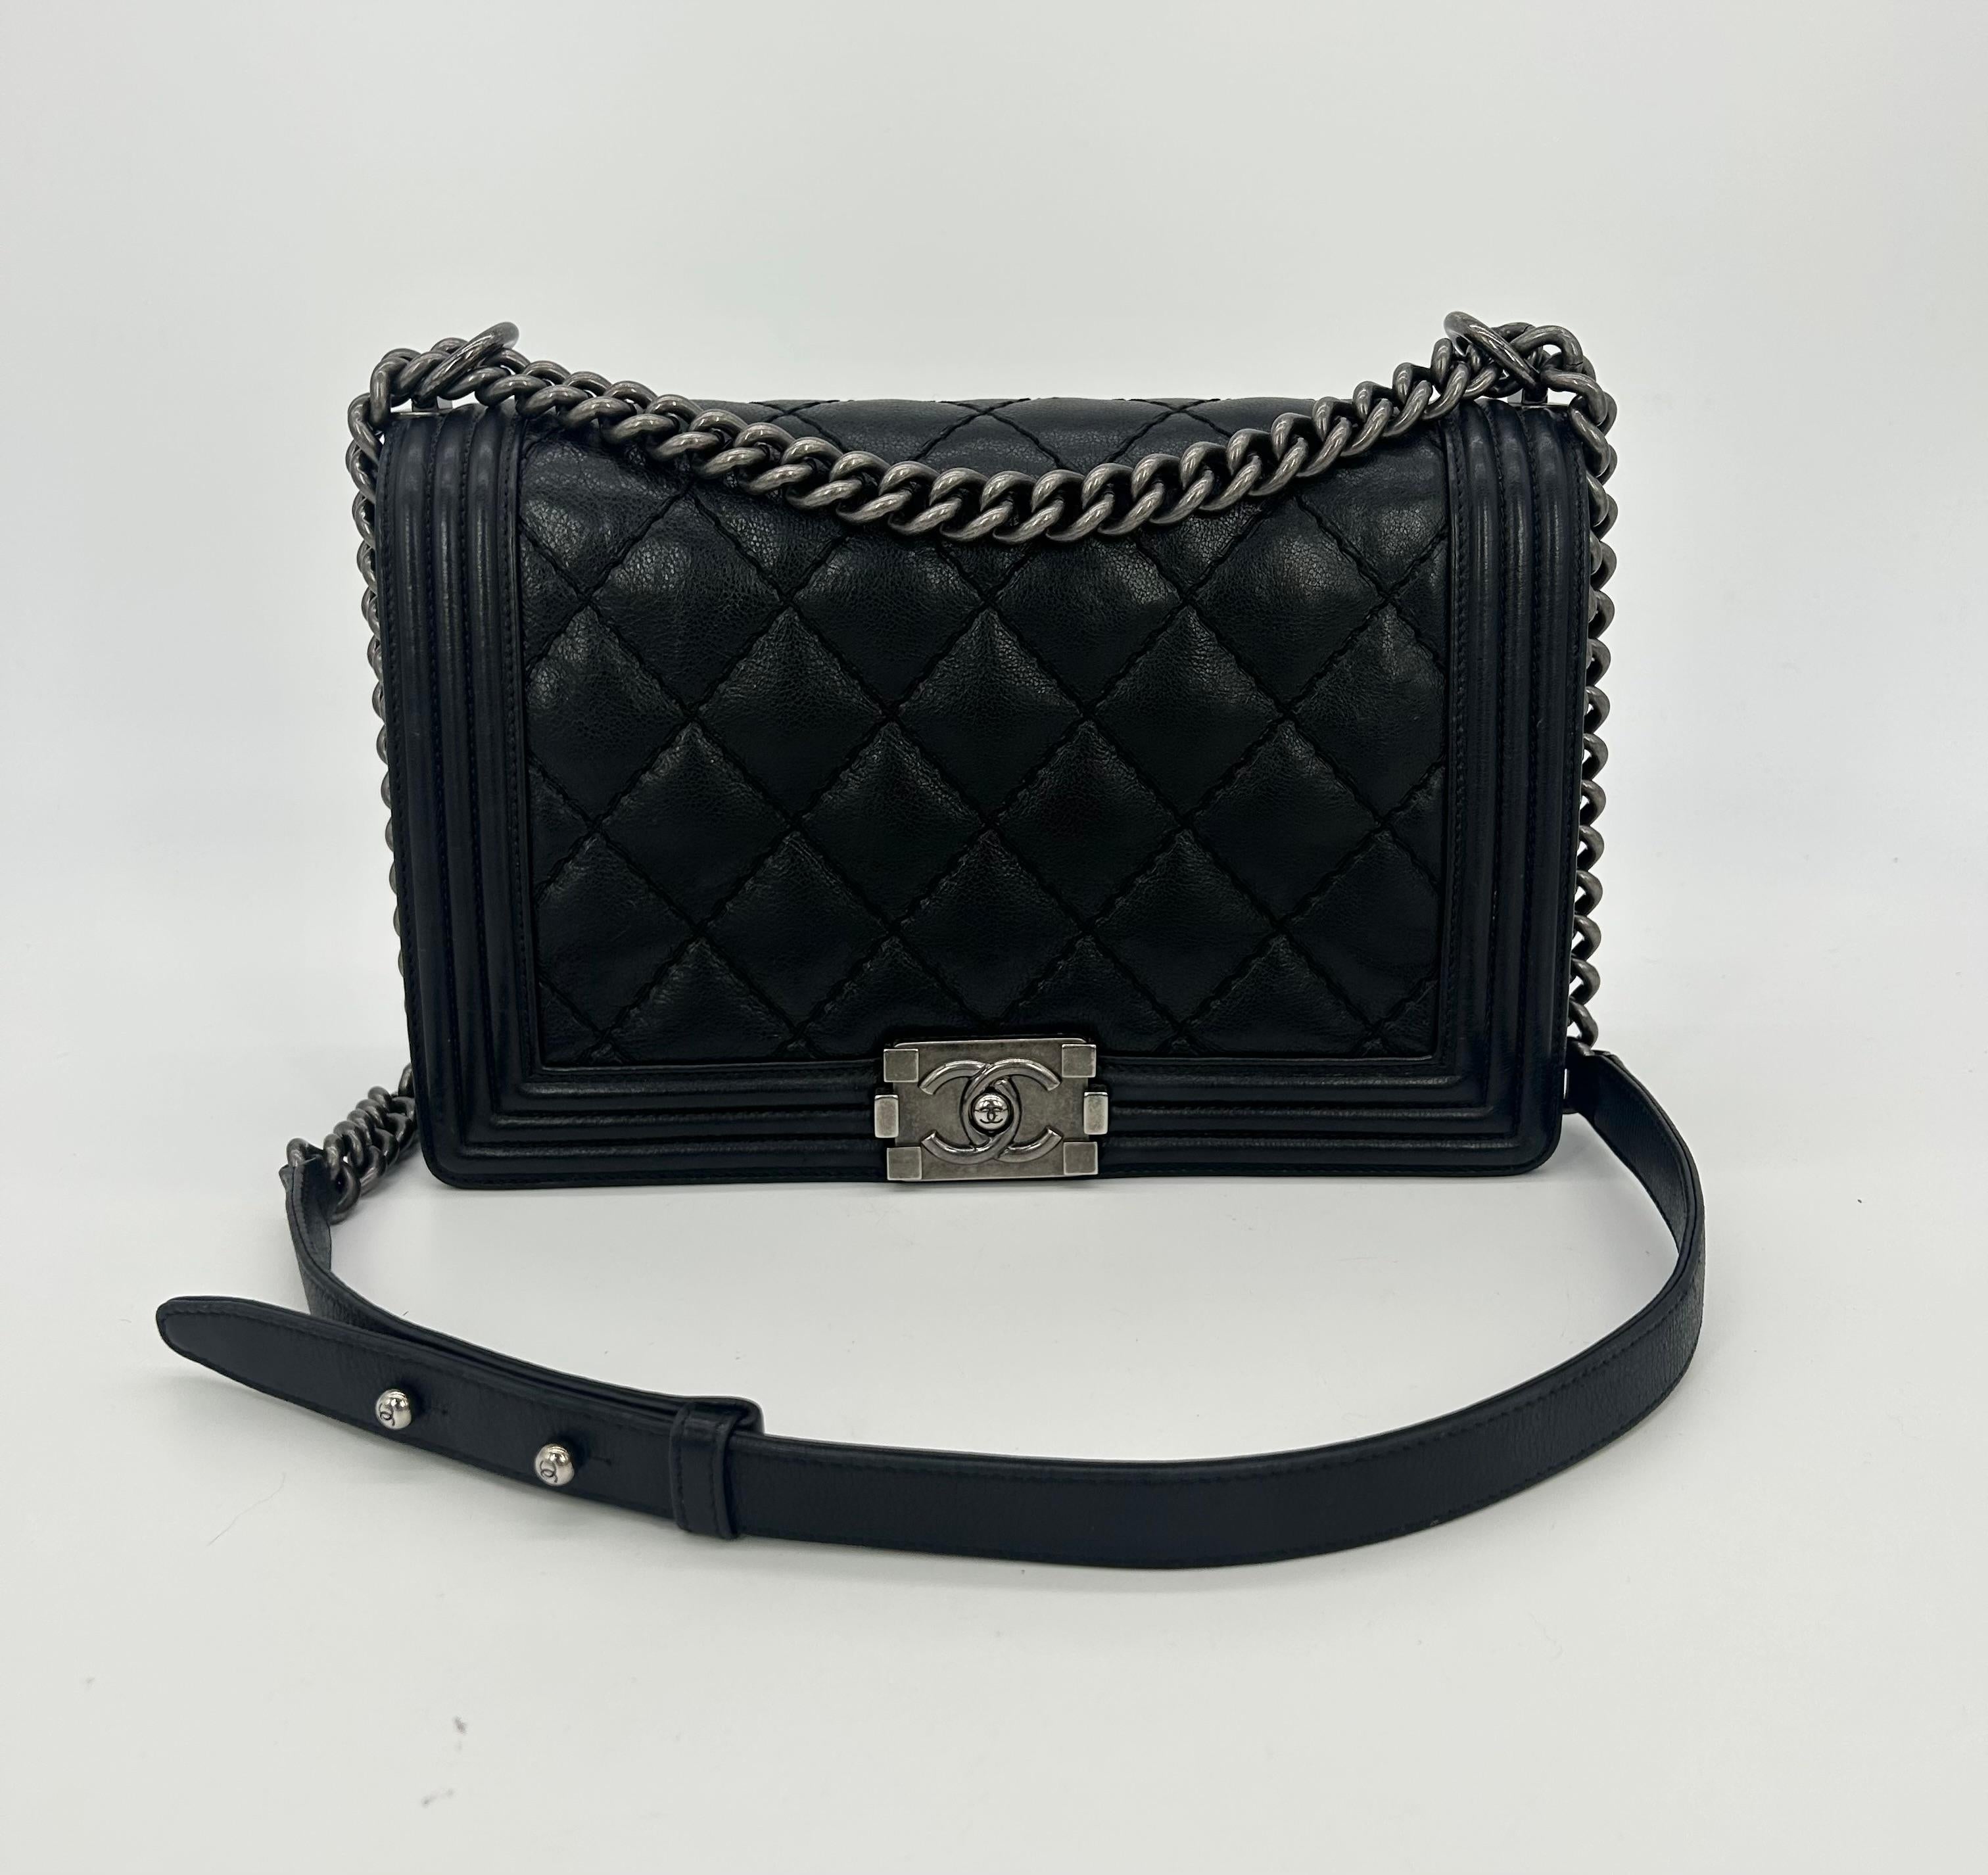 Chanel Black Lambskin Quilted Medium Boy Bag In very good condition. Black quilted lambskin exterior with black solid leather border along front and back sides. Antiqued Silver ruthenium hardware. Chain and leather shoulder strap can be worn short